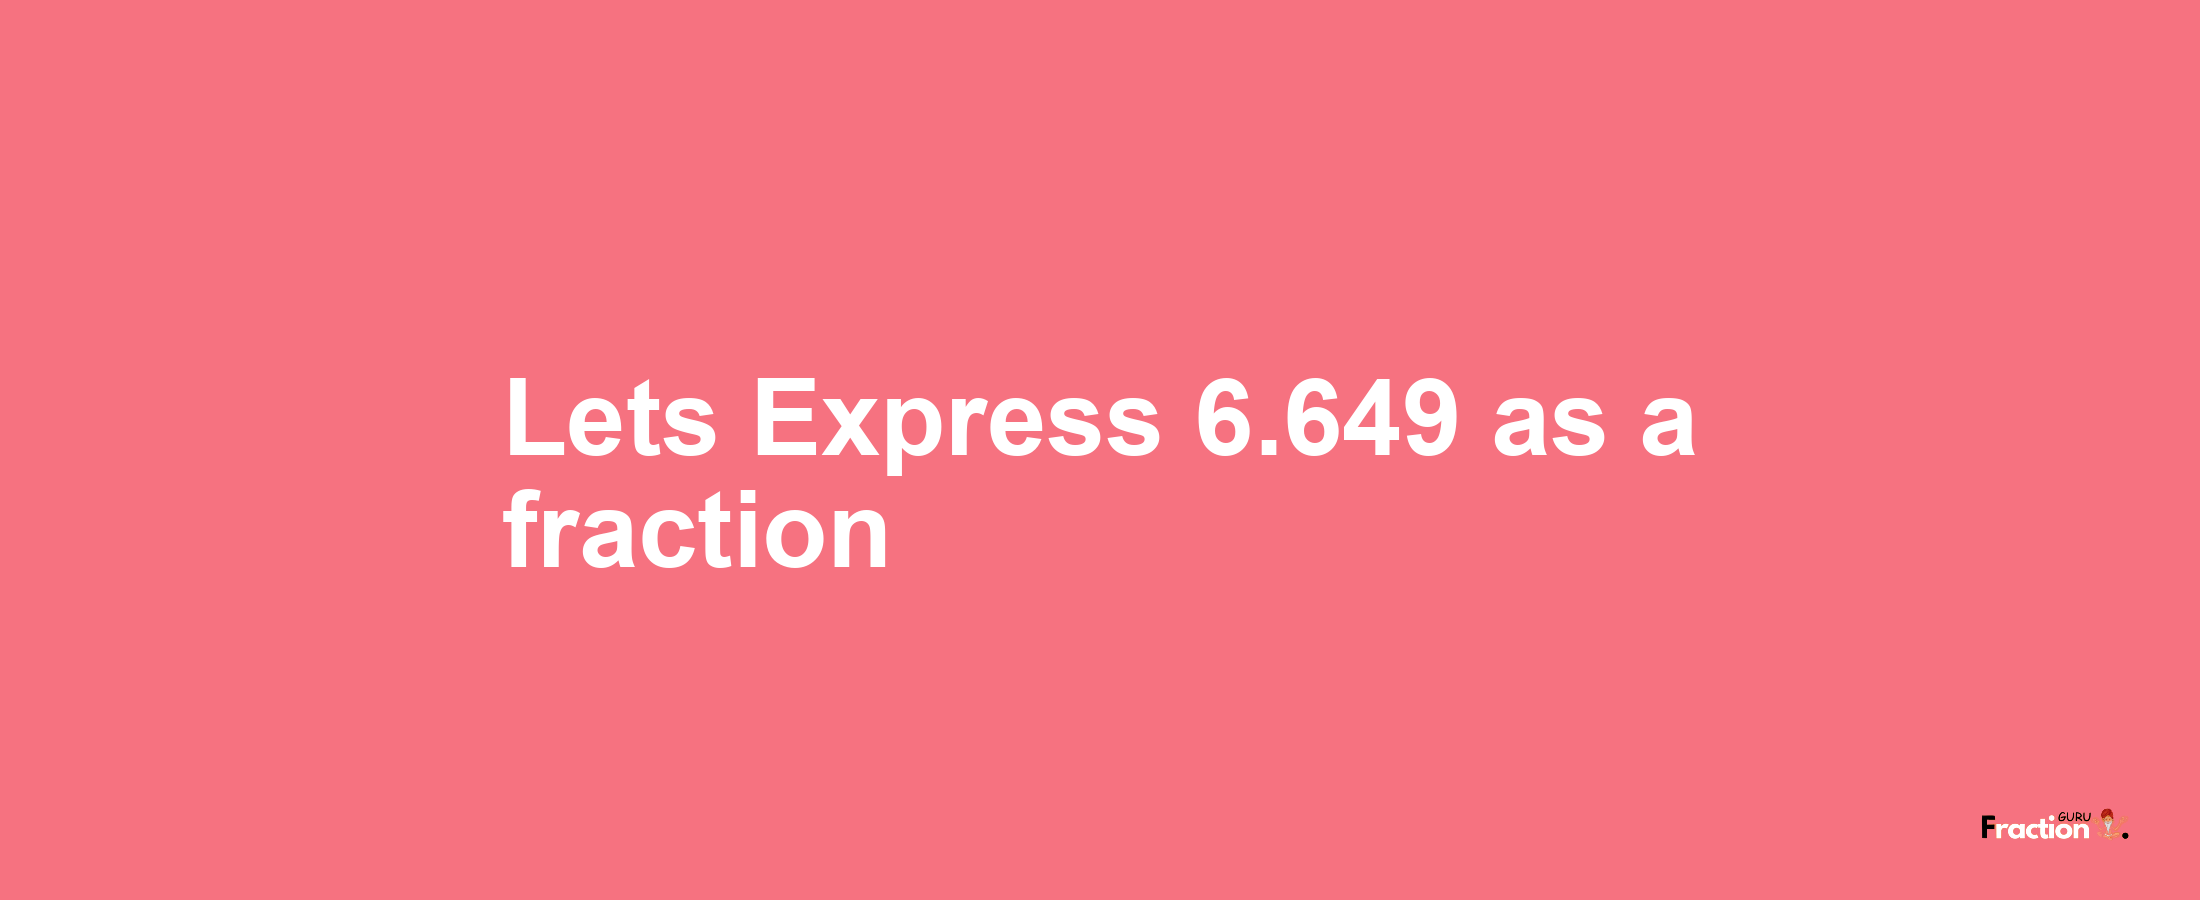 Lets Express 6.649 as afraction